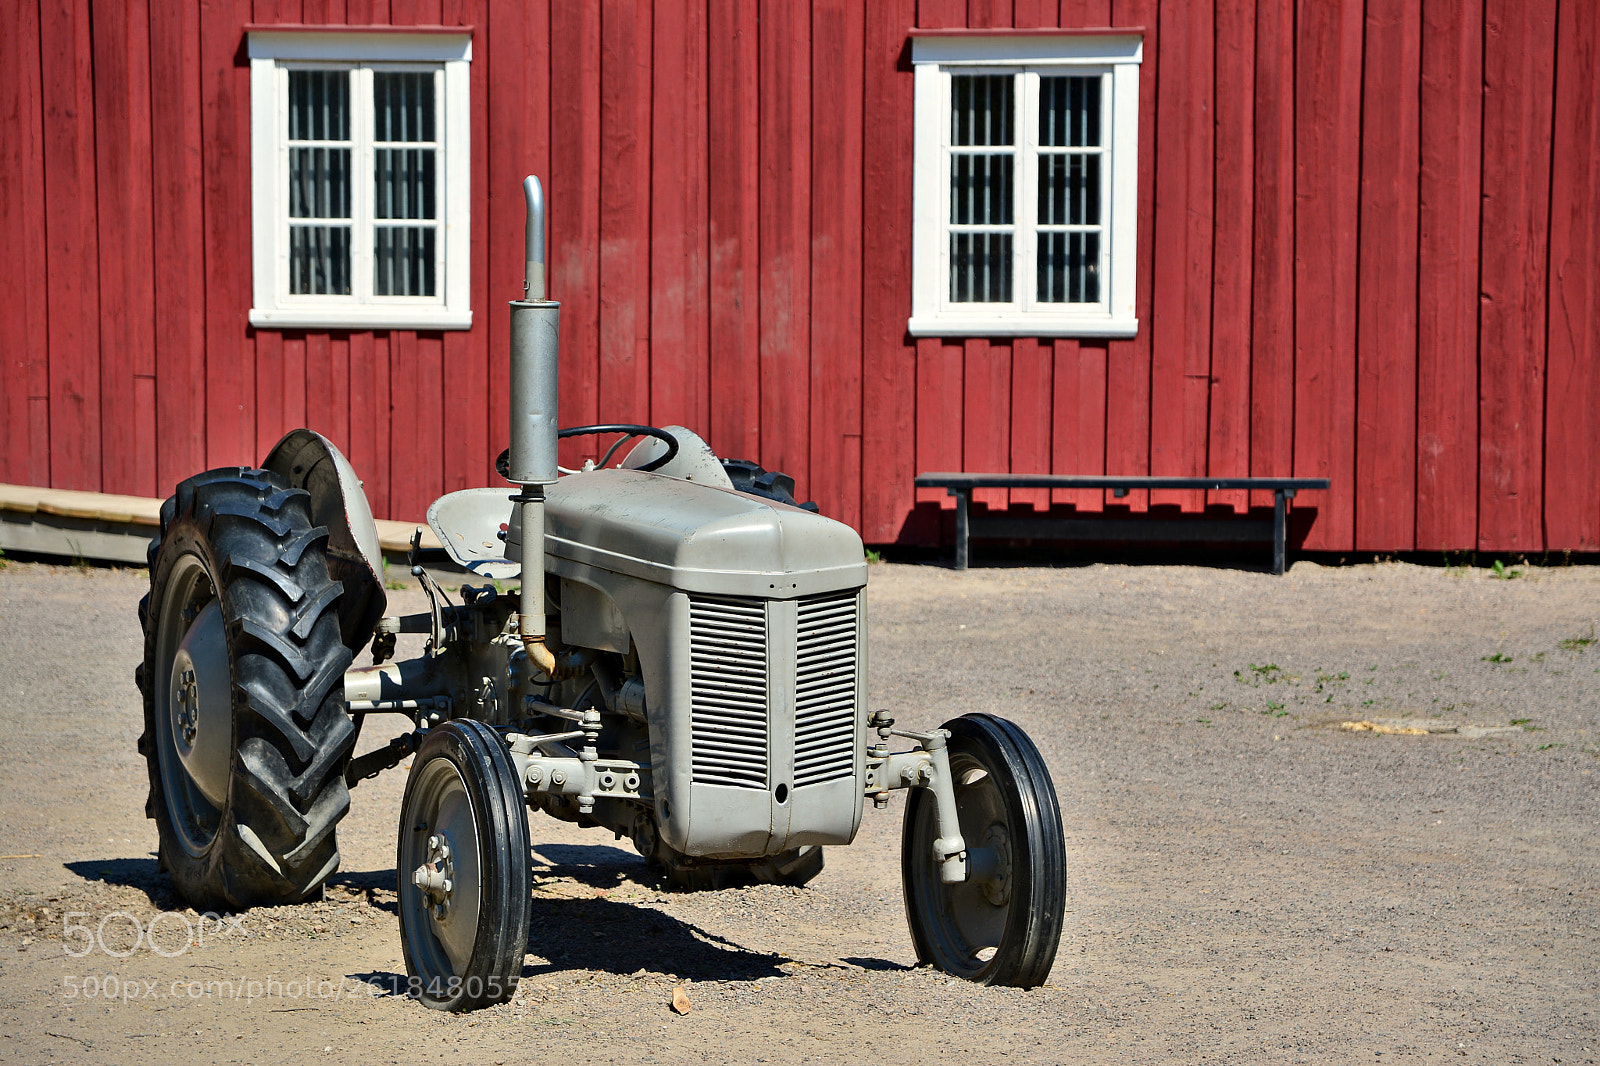 Nikon D5200 sample photo. Old tractor photography